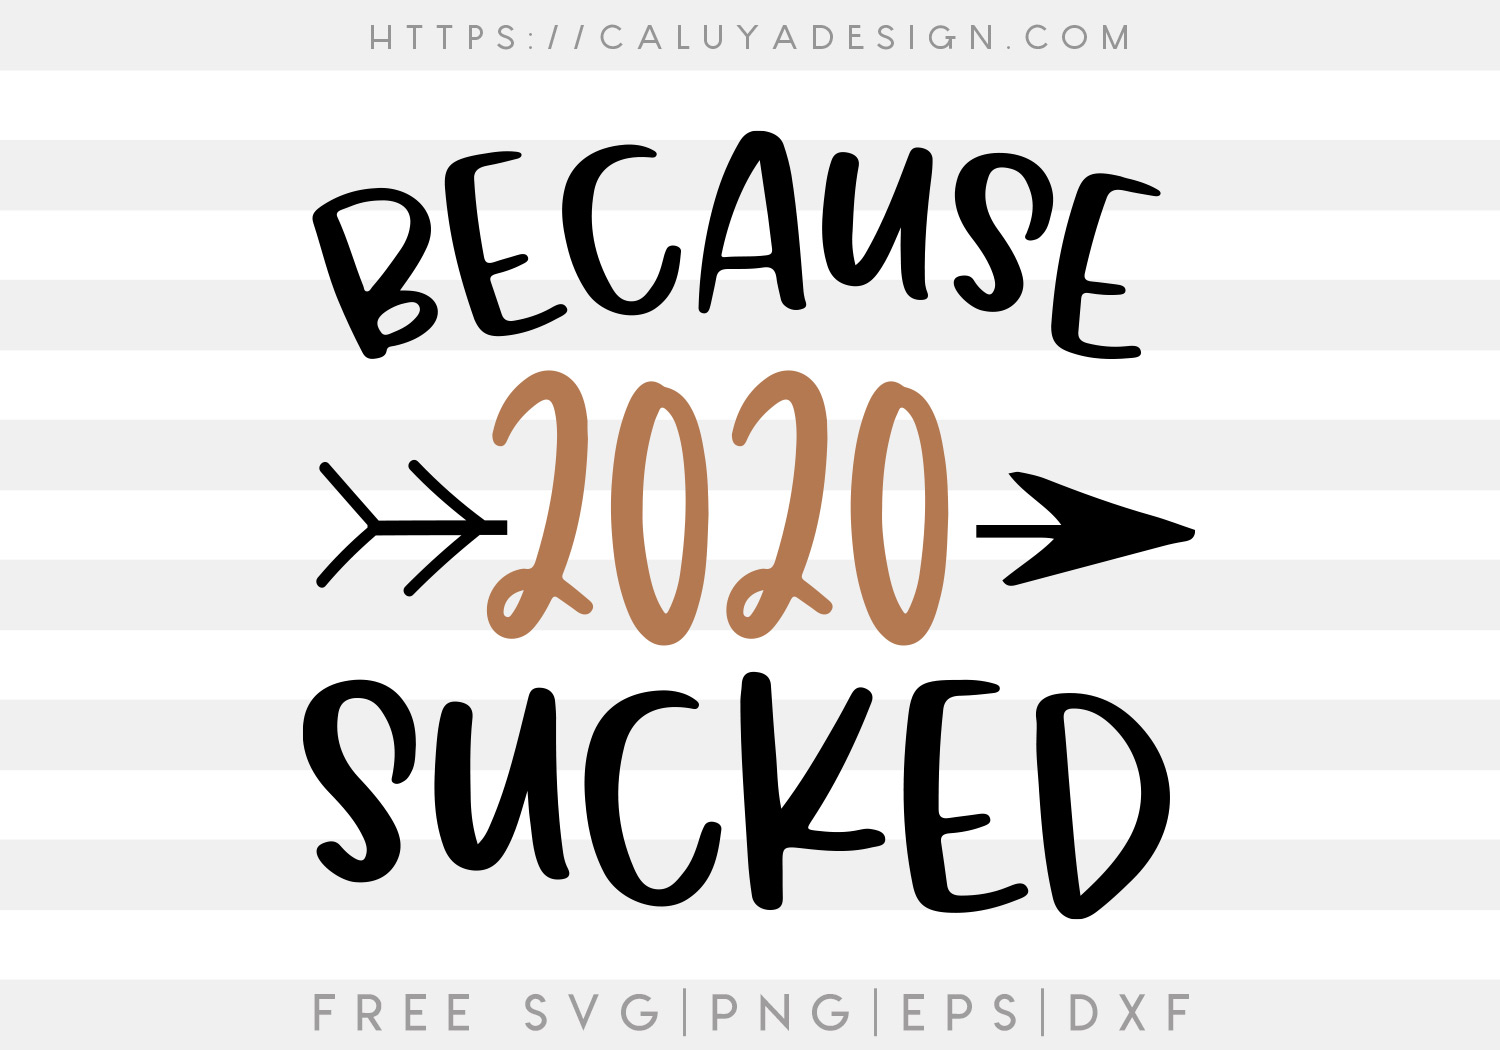 Because 2020 Sucked SVG, PNG, EPS & DXF